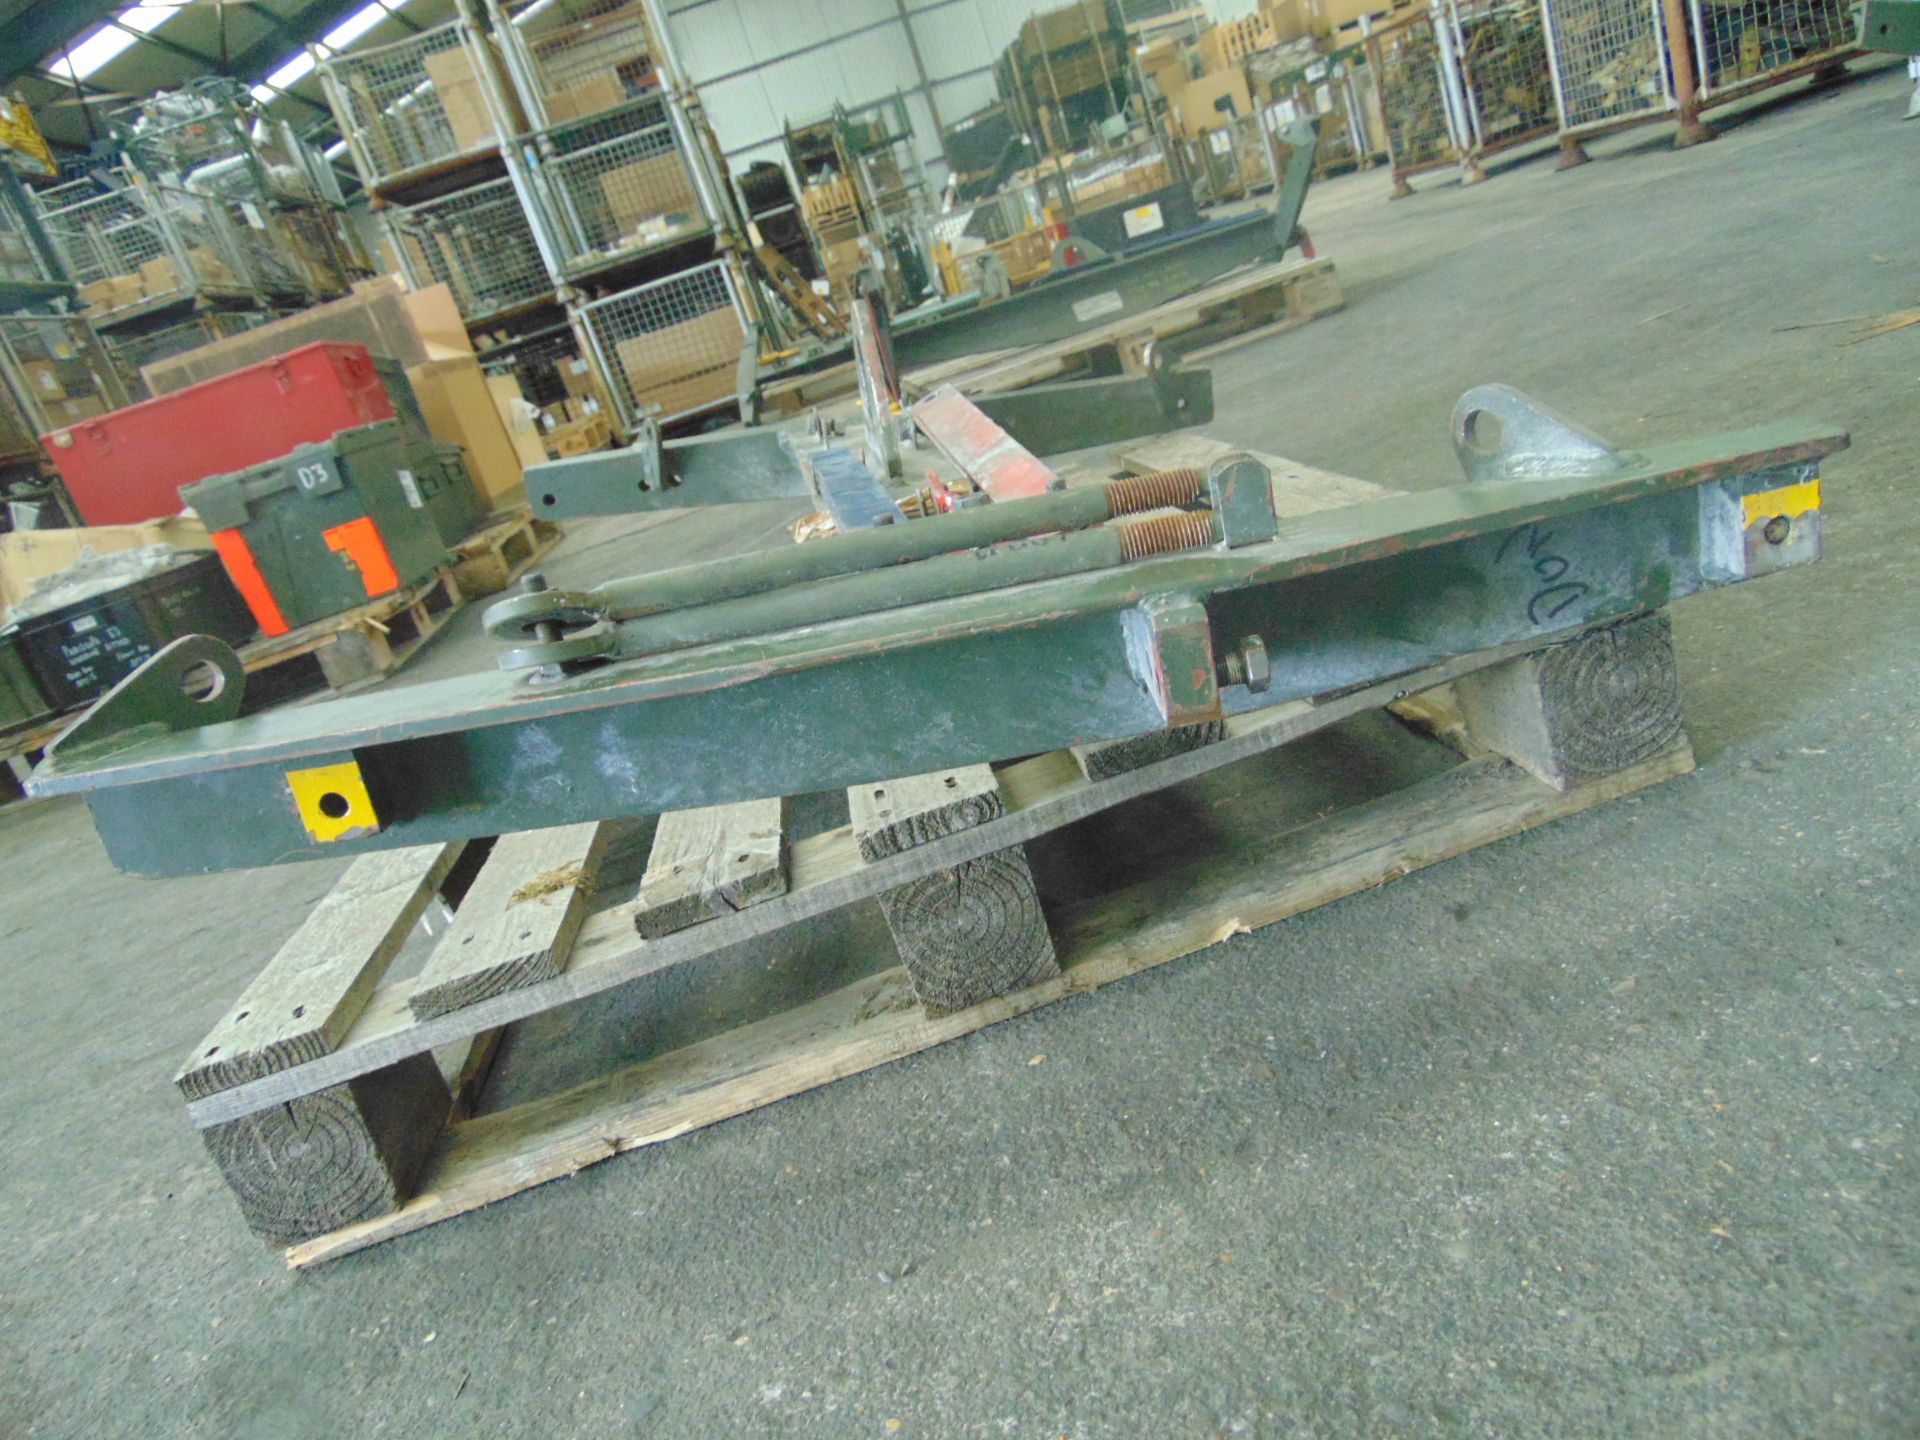 Extremely Rare Original FV432 Pack Lifting Frame Complete with Attachments - Image 4 of 6